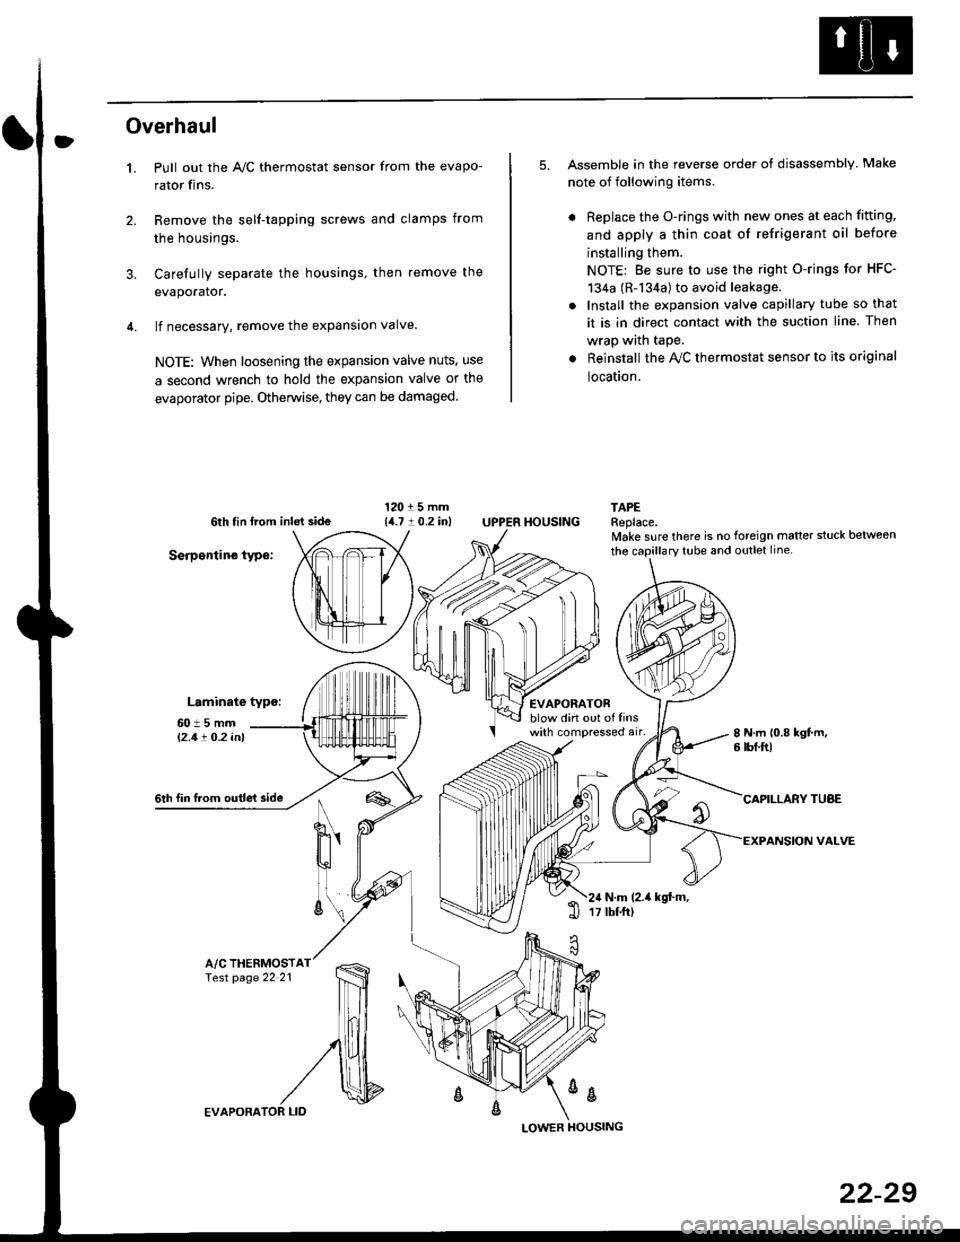 HONDA CIVIC 1997 6.G Workshop Manual Overhaul
1.
3.
Pull out the A,/C thermostat sensor from the evapo-
rator fins.
Remove the self-tapping screws and clamps from
the housings.
Carefully separate the housings, then remove the
evaporator.